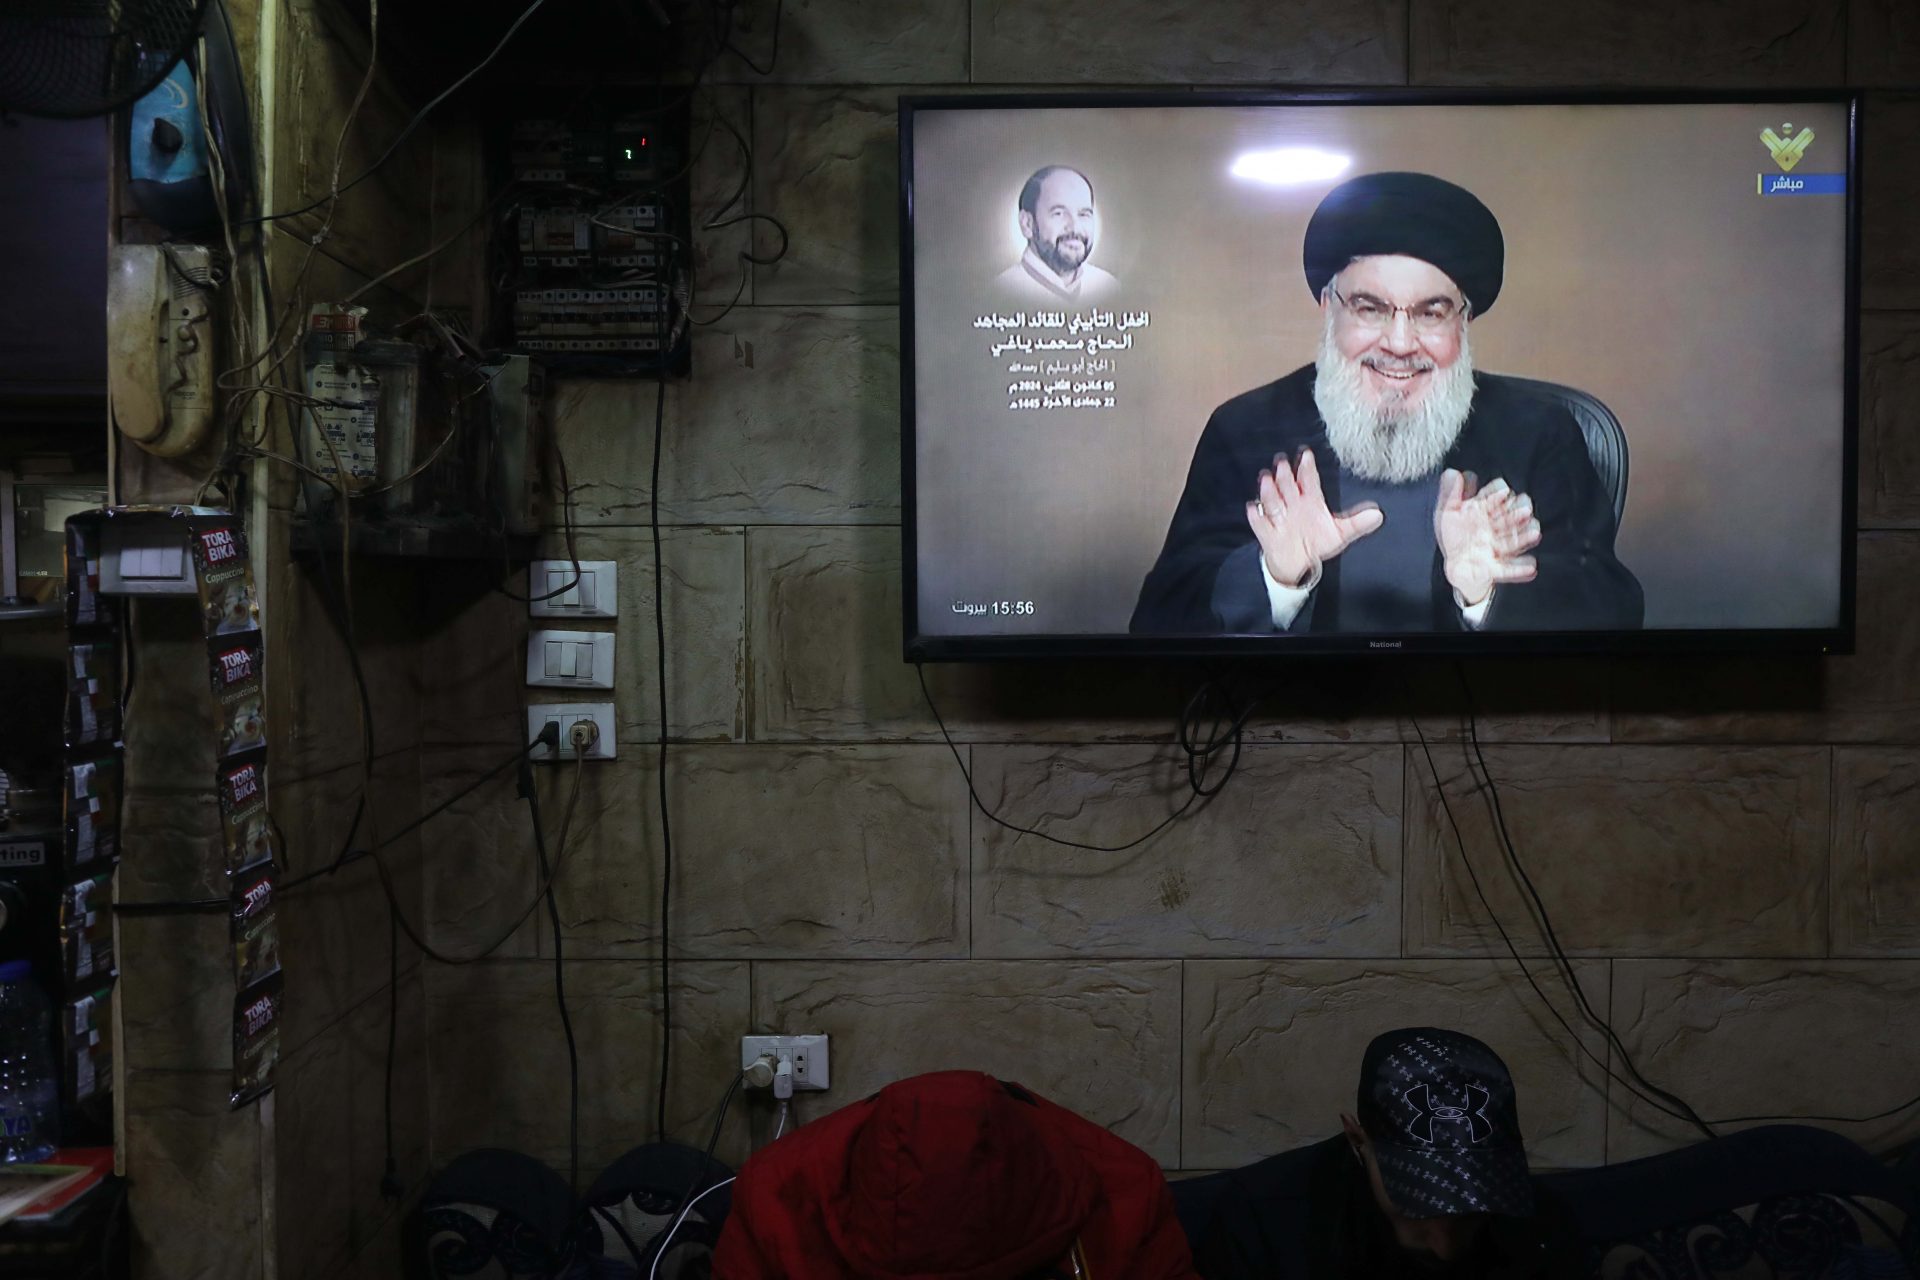 Hezbollah: “No restraint and no rules and no ceilings” 